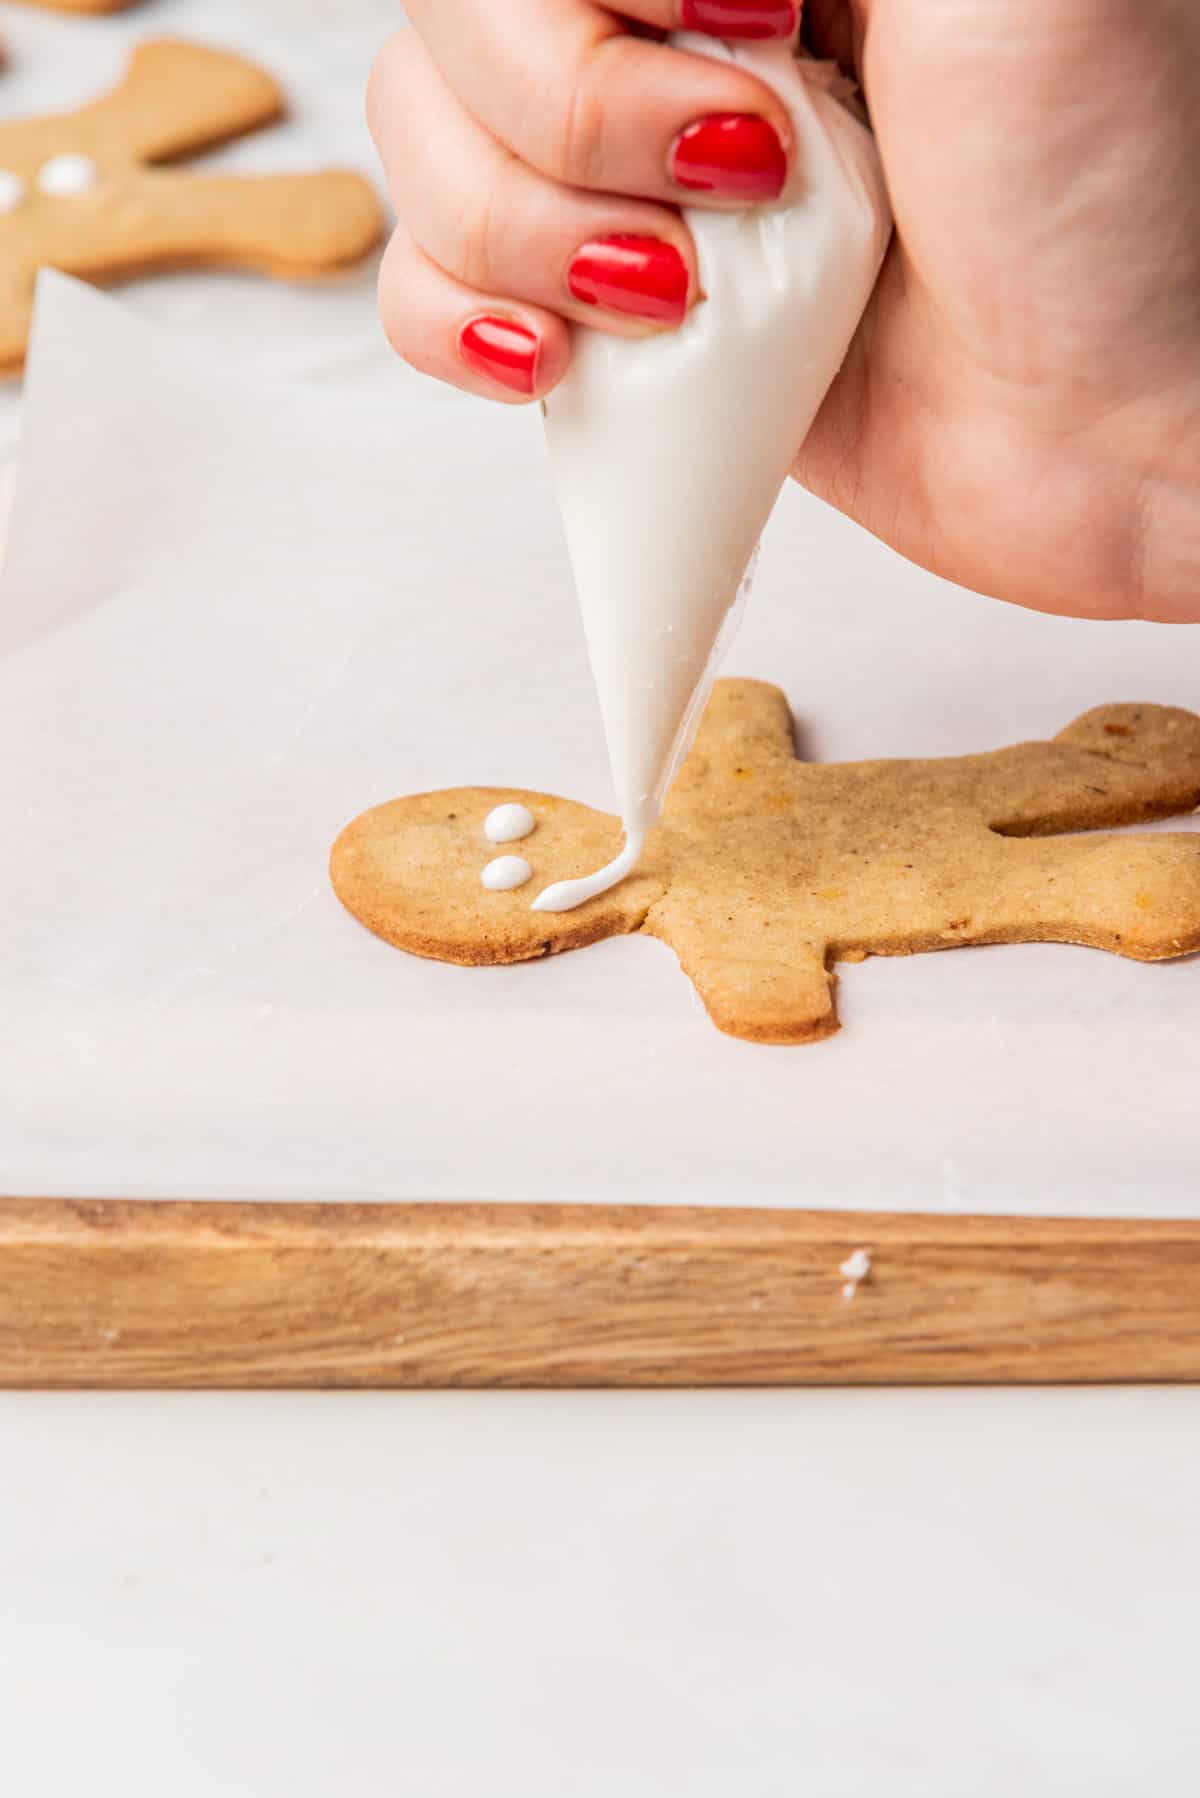 Icing being piped onto a gingerbread man cookie.